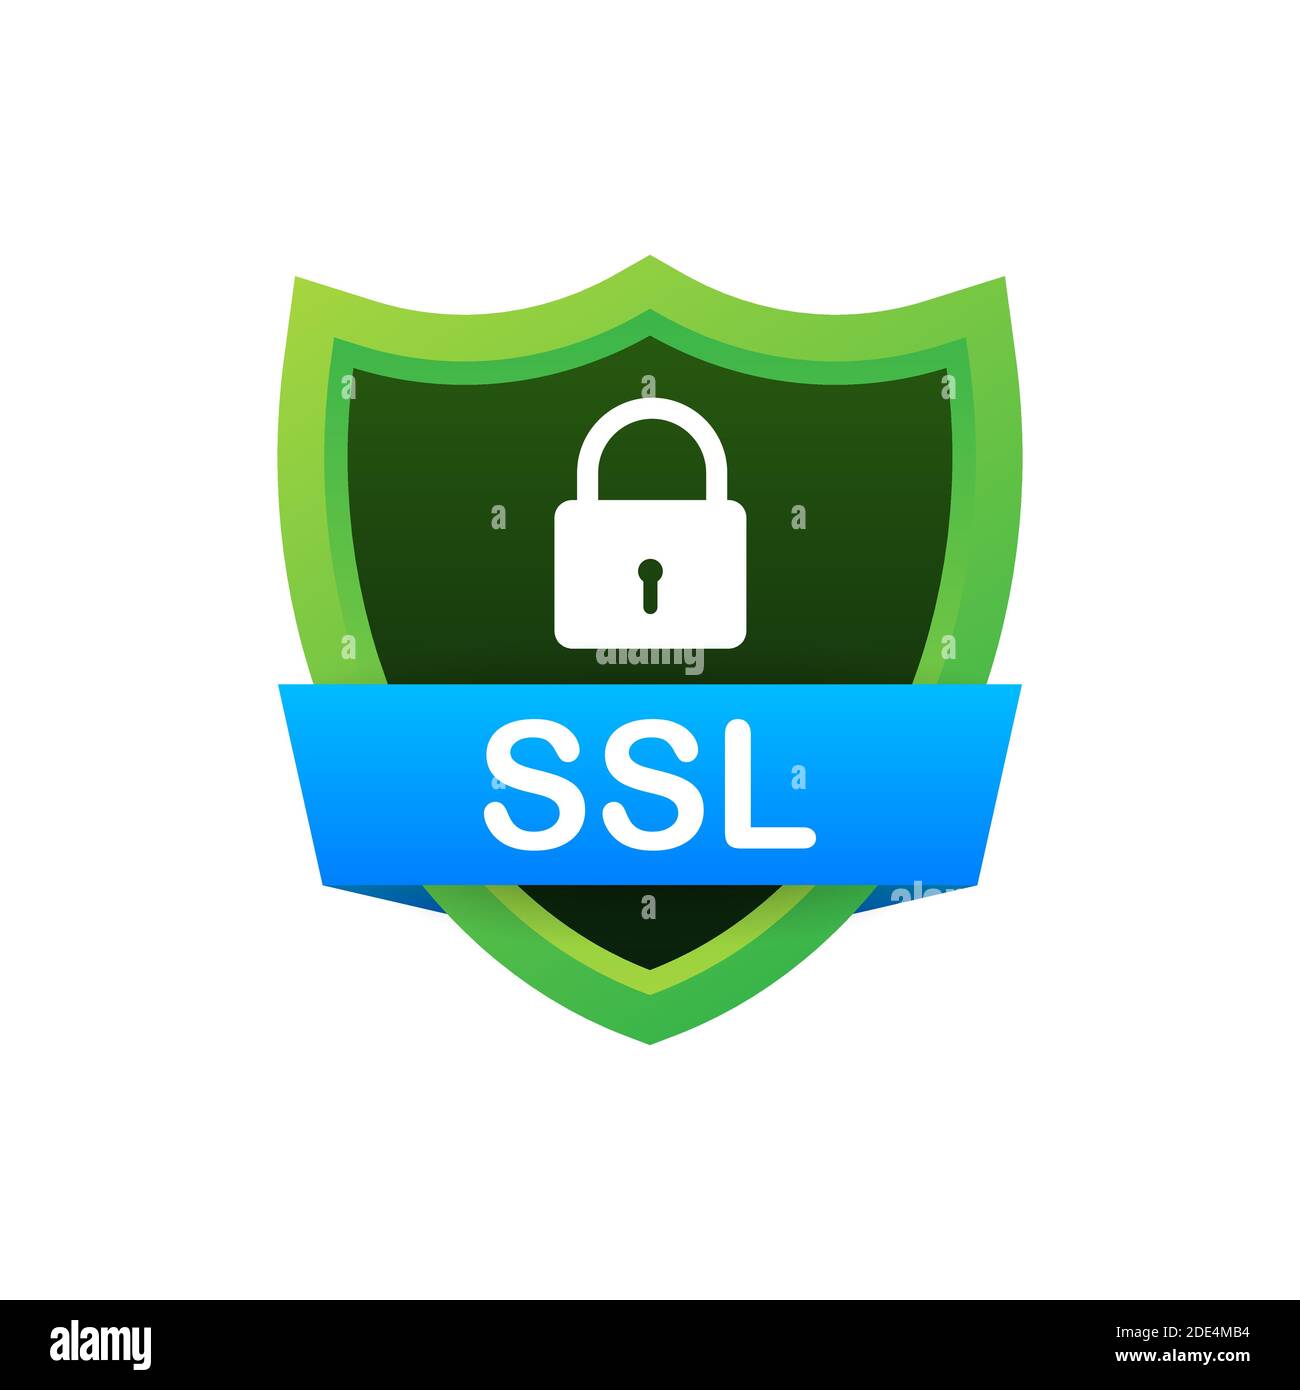 Secure connection icon vector illustration isolated on white background, flat style secured ssl shield symbols. Stock Vector